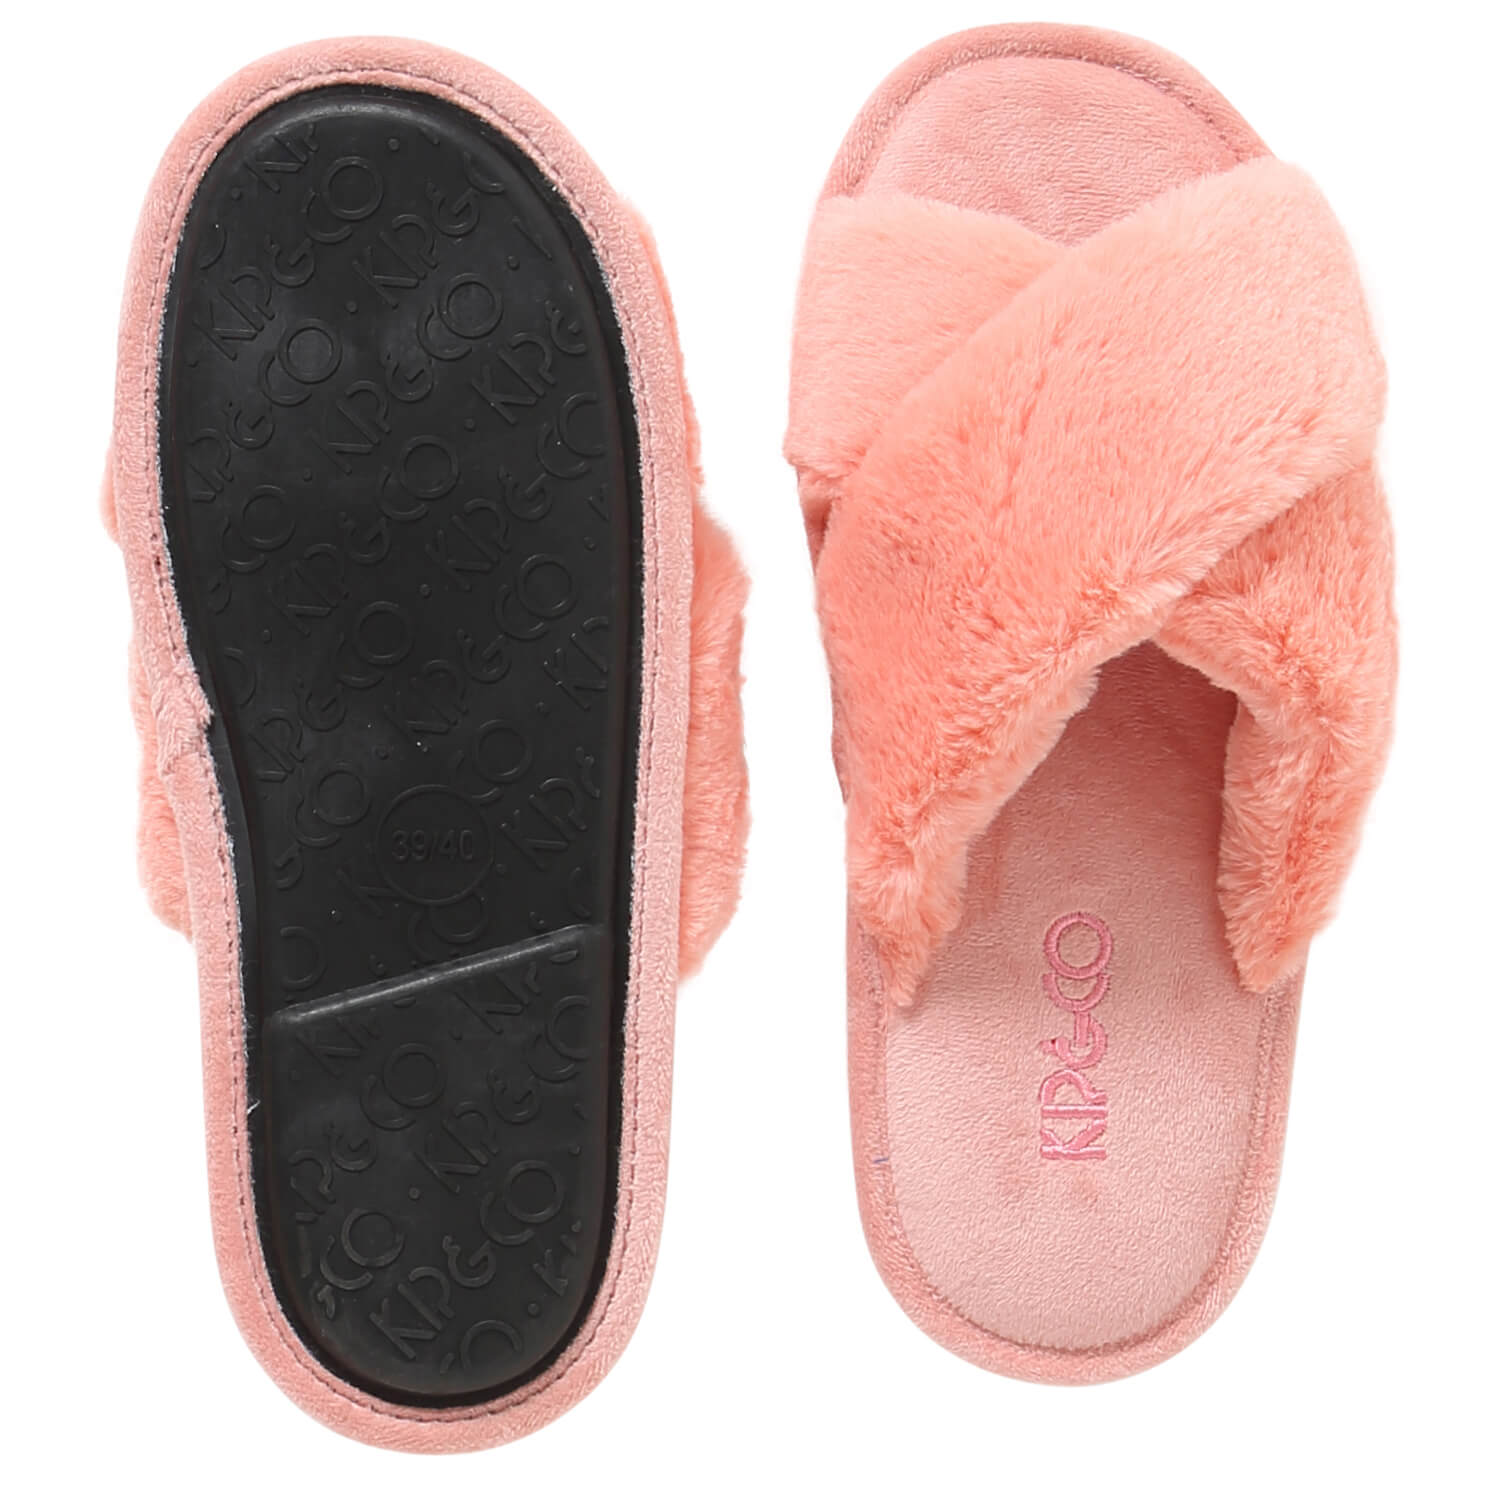 Kip and Co blush pink slippers | The Home Maven